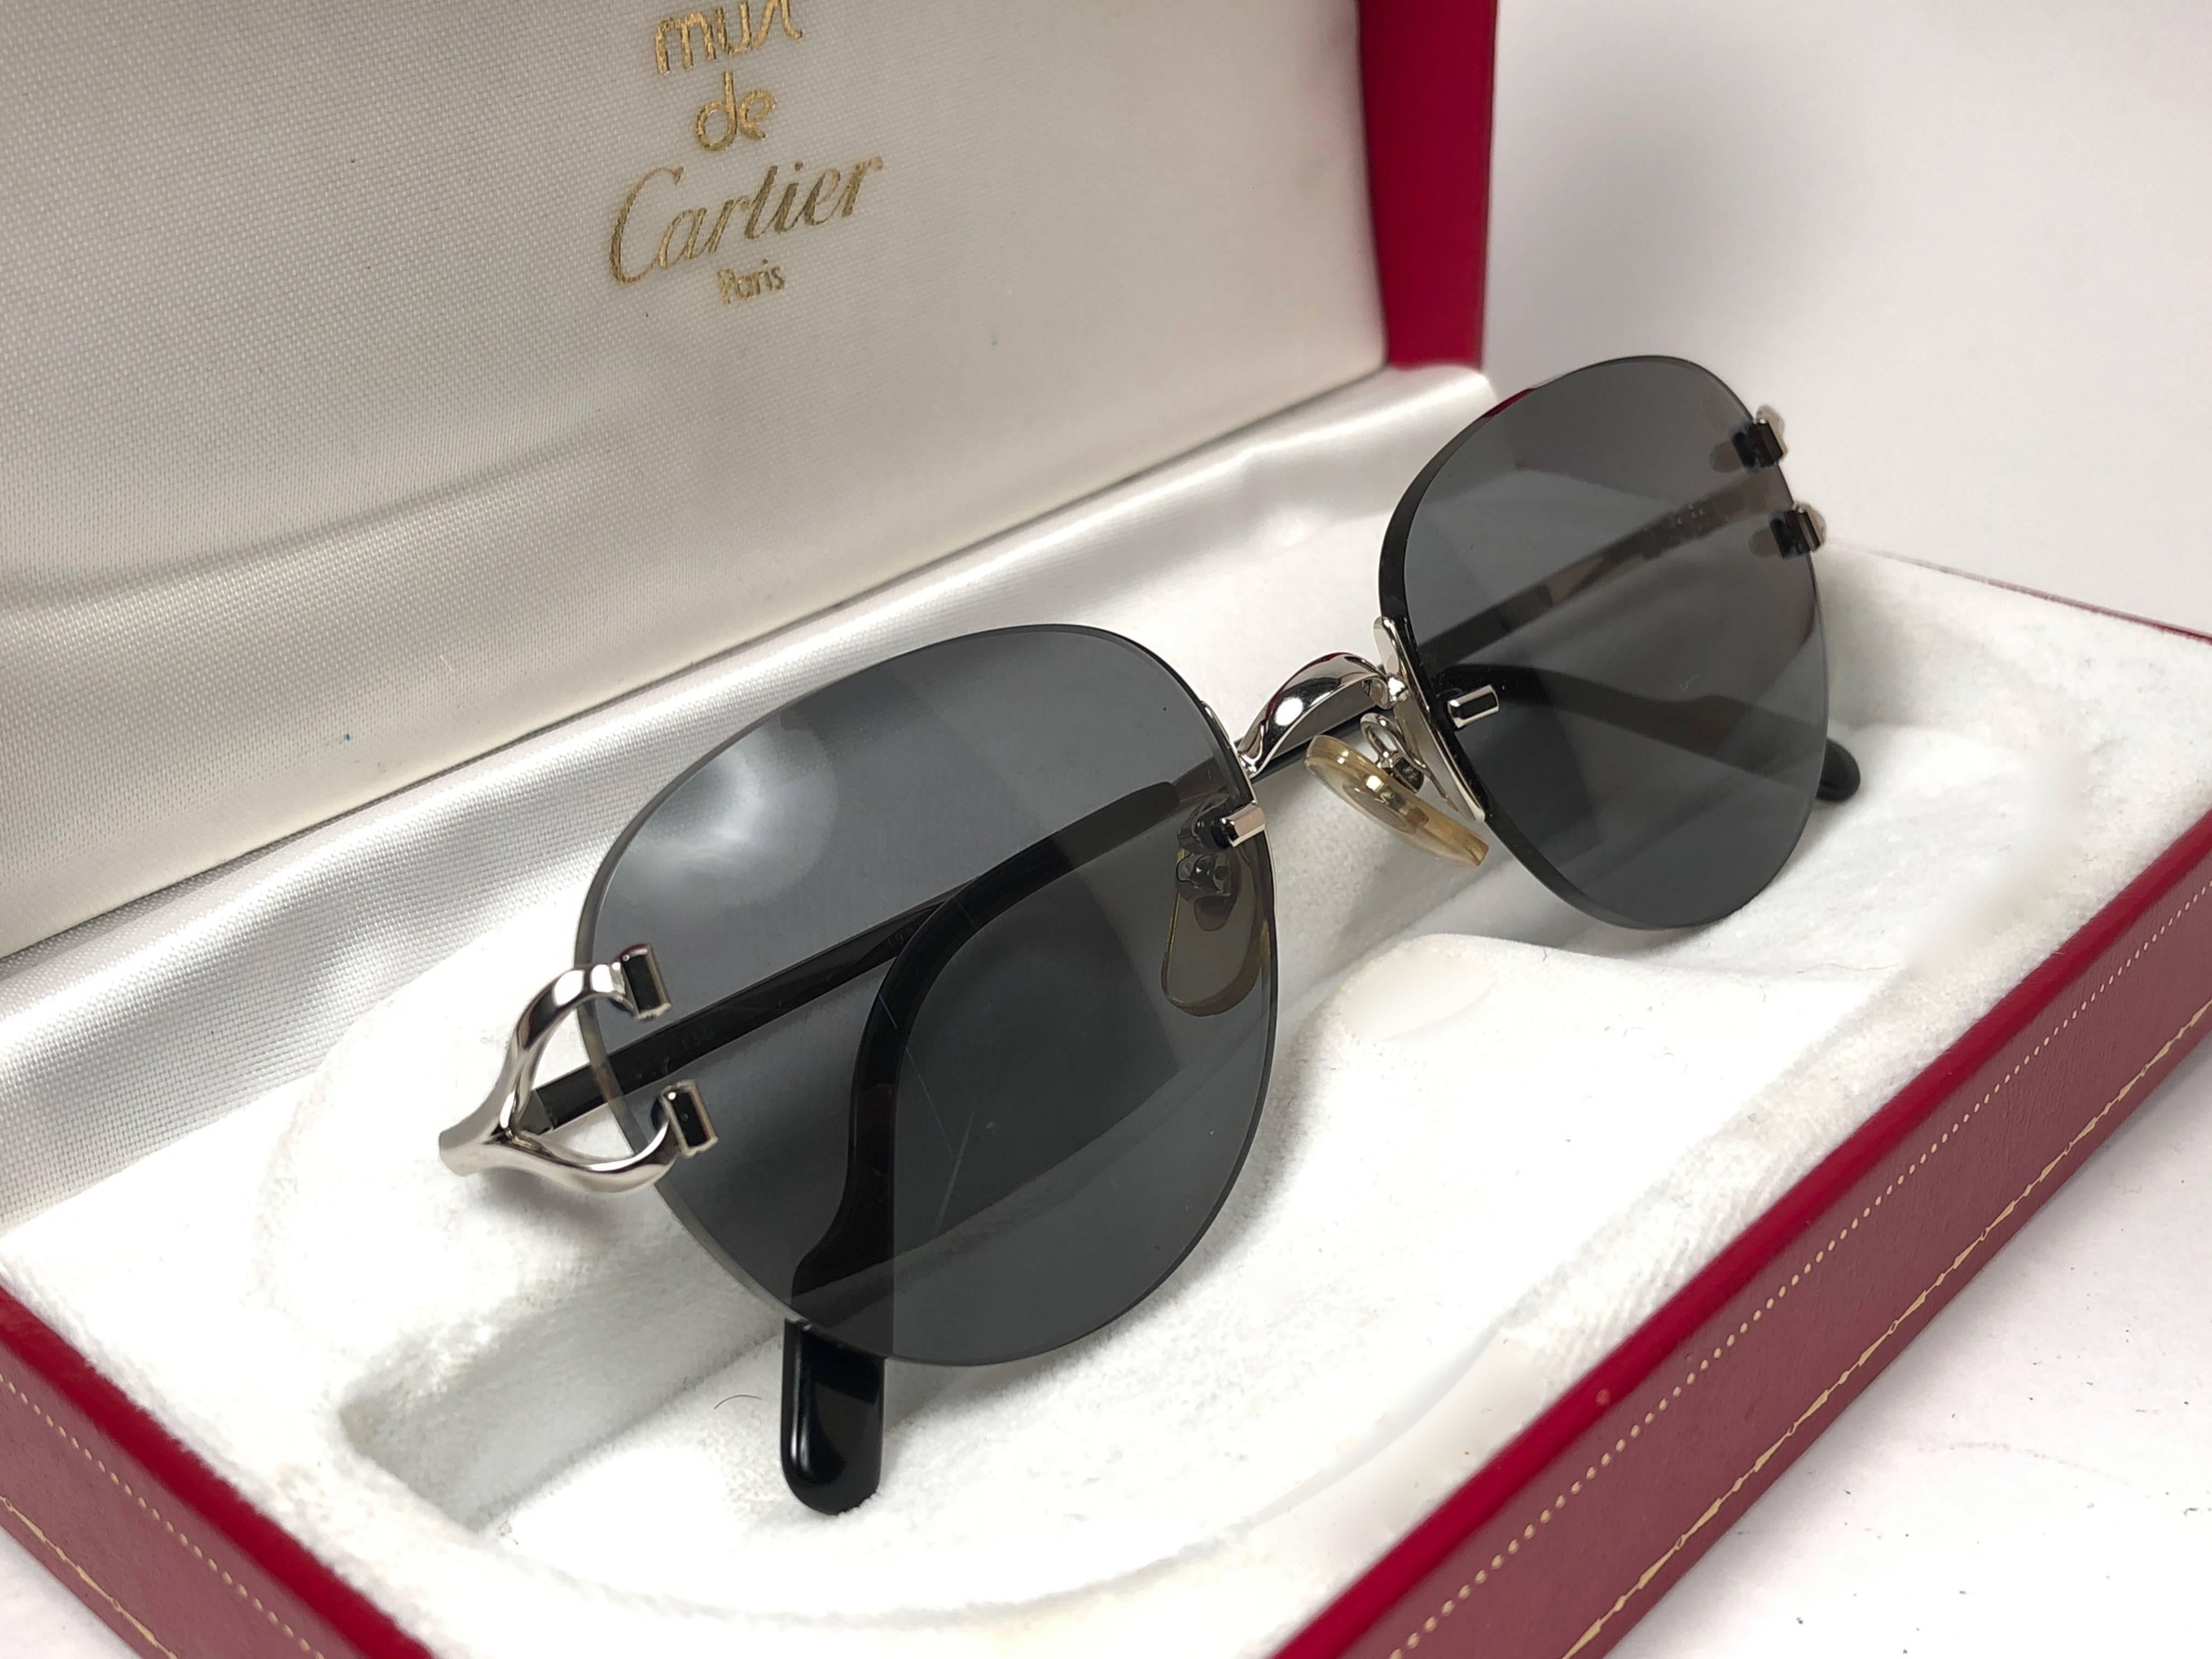 New Cartier Salisbury unique rimless sunglasses with Grey G15 (uv protection) lenses.  Frame with the front and sides in platine. All hallmarks. Cartier gold signs on the ear paddles.  These are like a pair of jewels on your nose.  Beautiful design